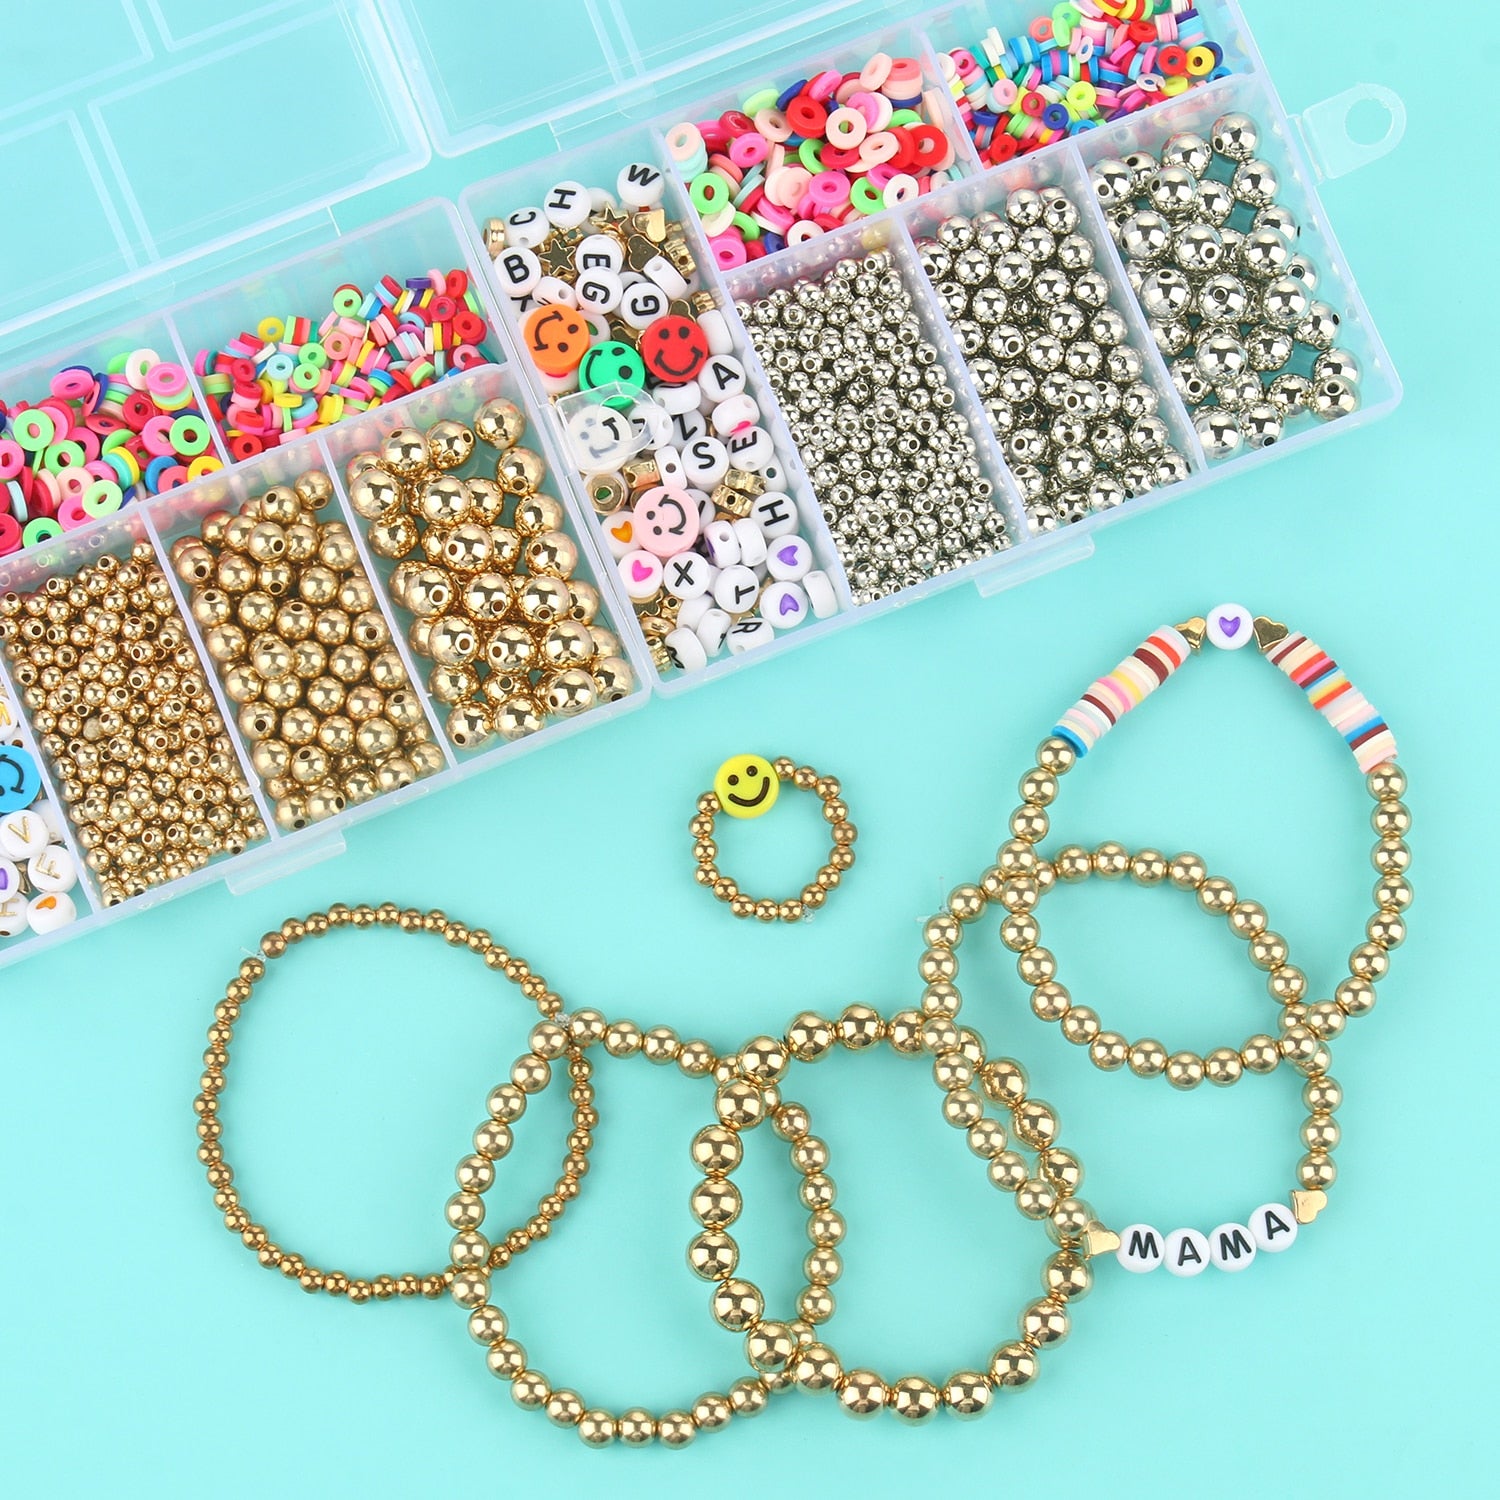  GREENTIME Bracelet Makingt Kit Pony Beads for Bracelet Making  with Smile Face Beads Polymer Clay Beads Letter Beads and Elastic String  for Jewelry Making Bracelet Jewelry Necklace Making